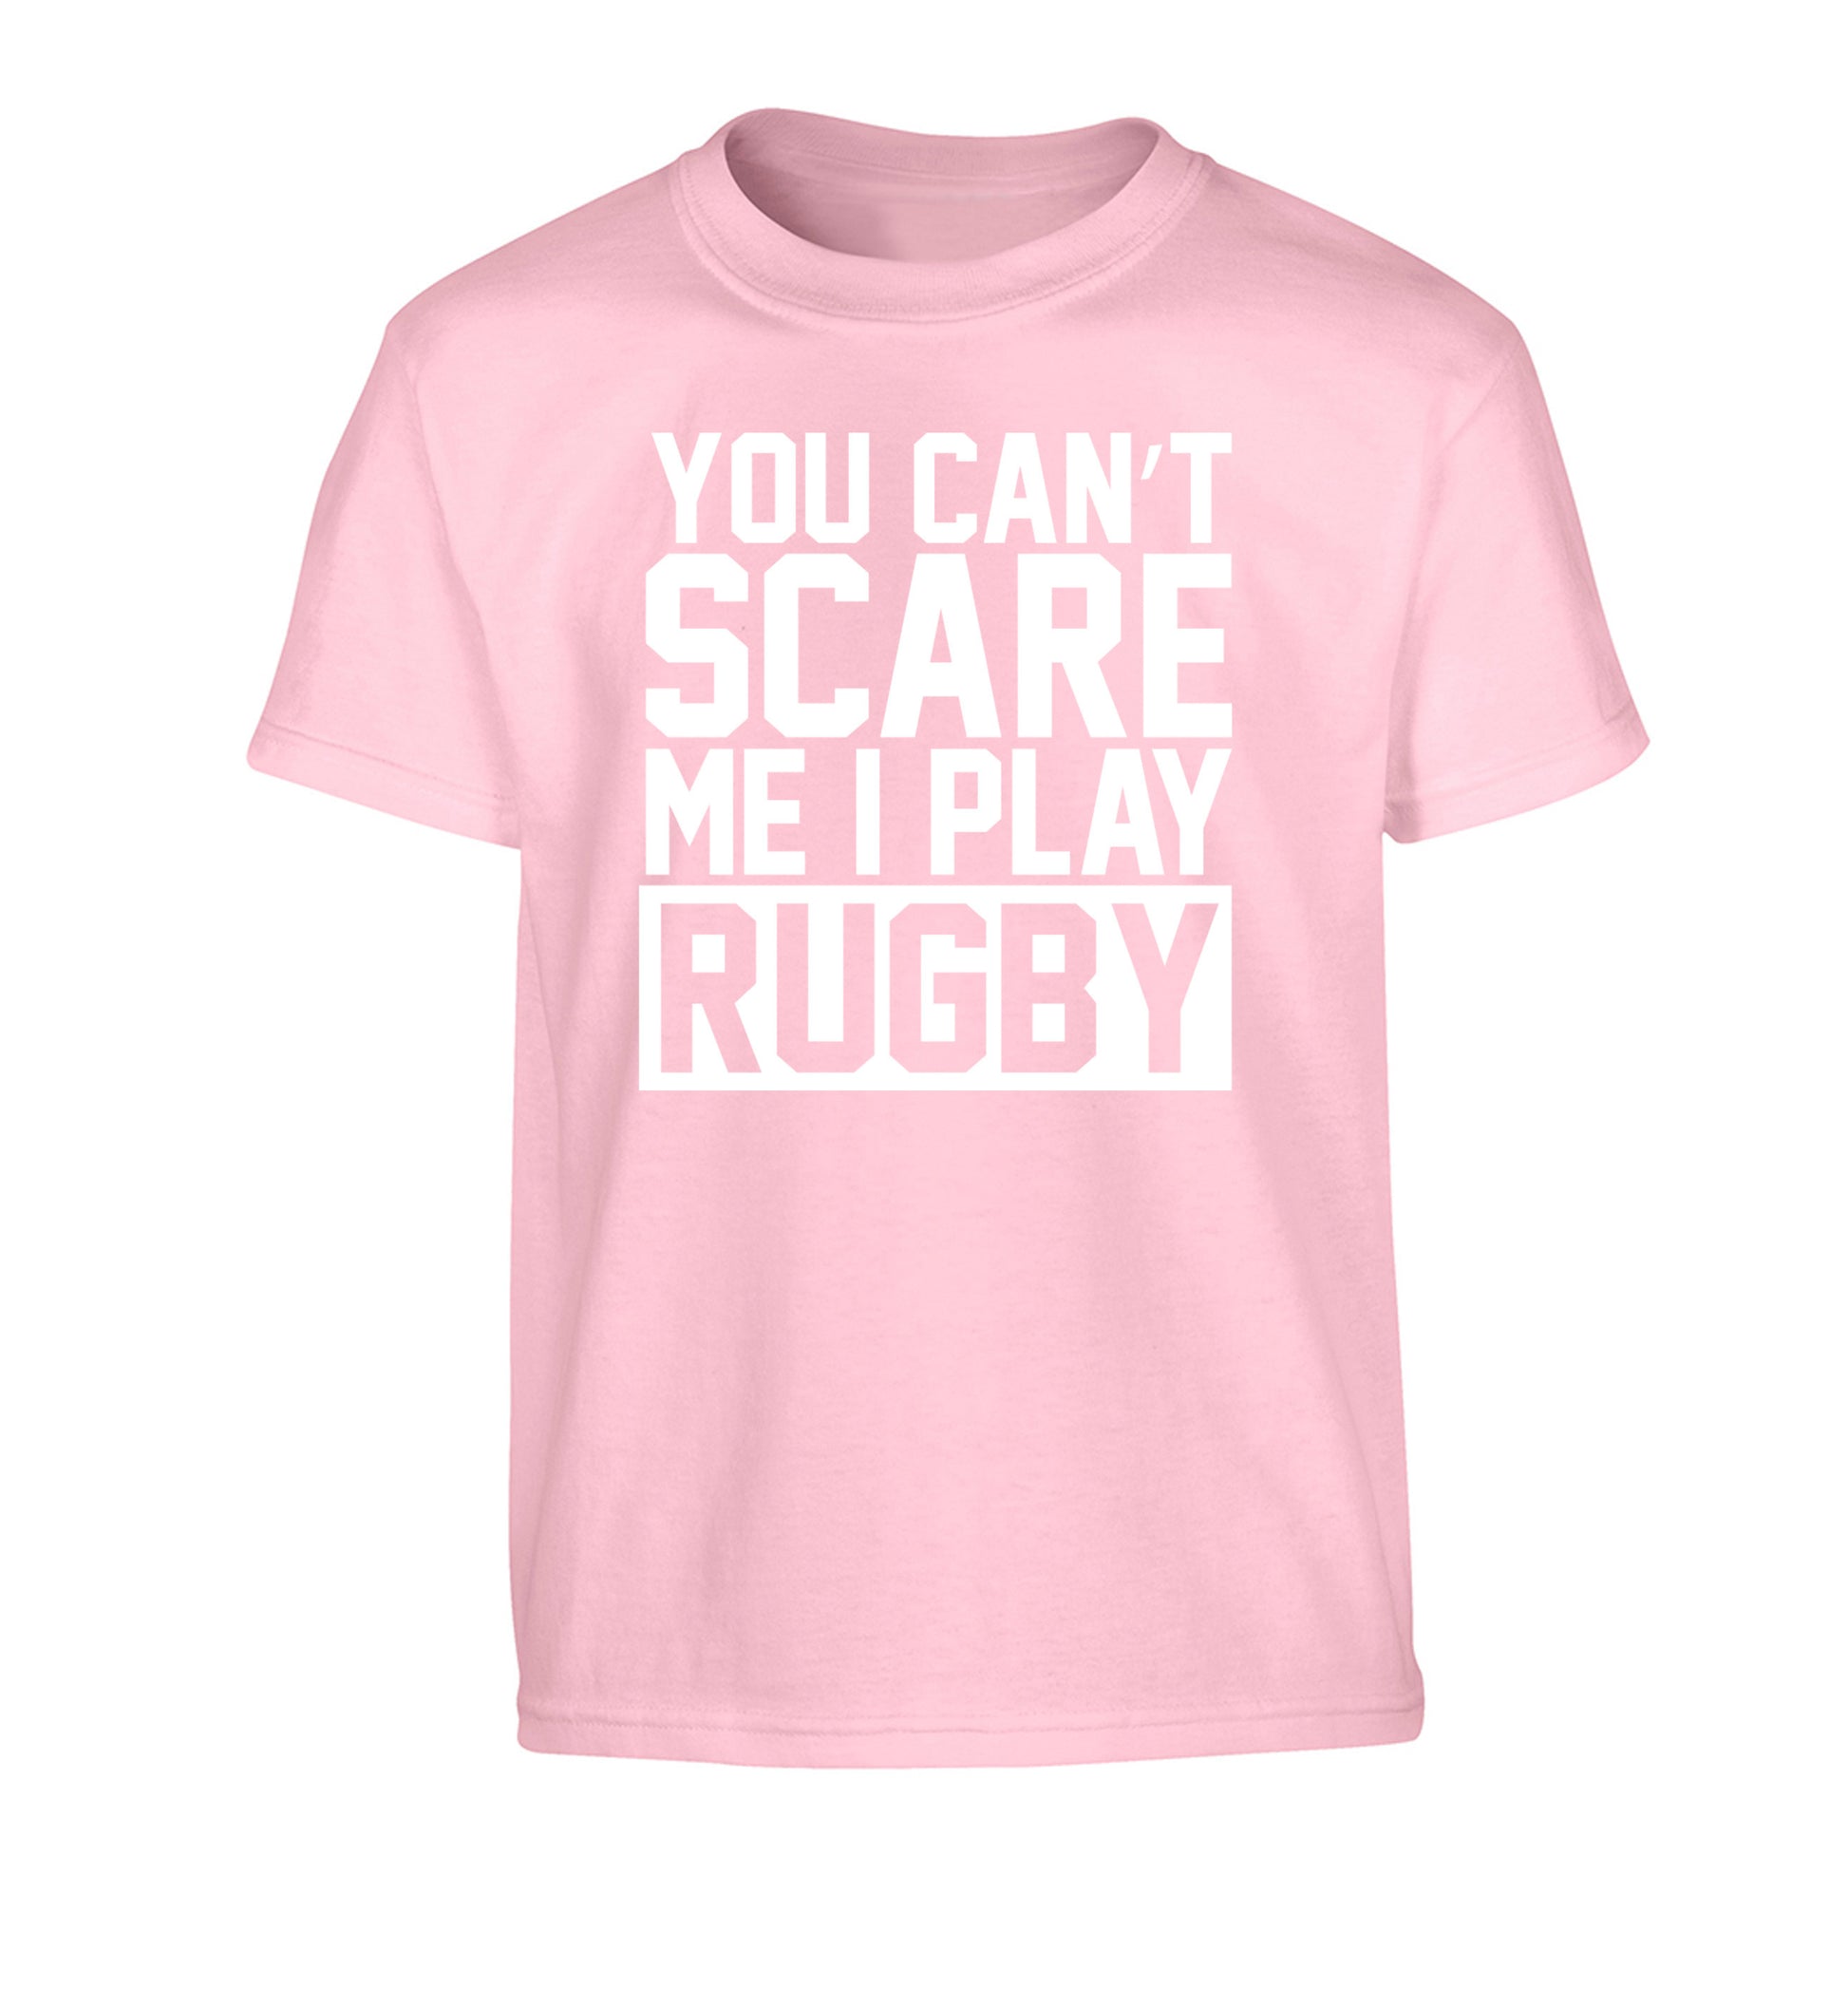 You can't scare me I play rugby Children's light pink Tshirt 12-14 Years